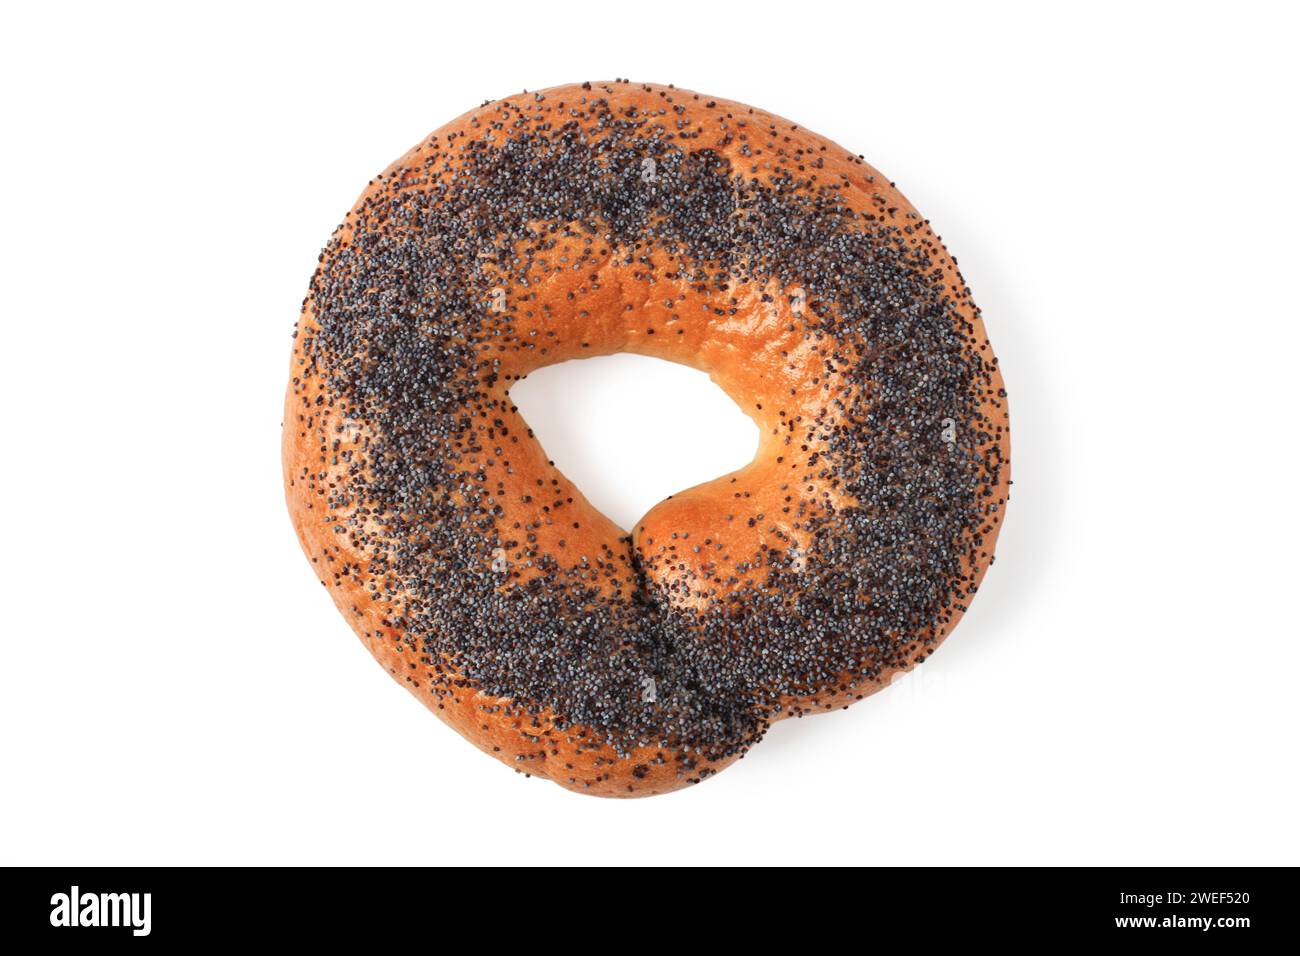 Bagel with poppy seeds closeup isolated on white background Stock Photo